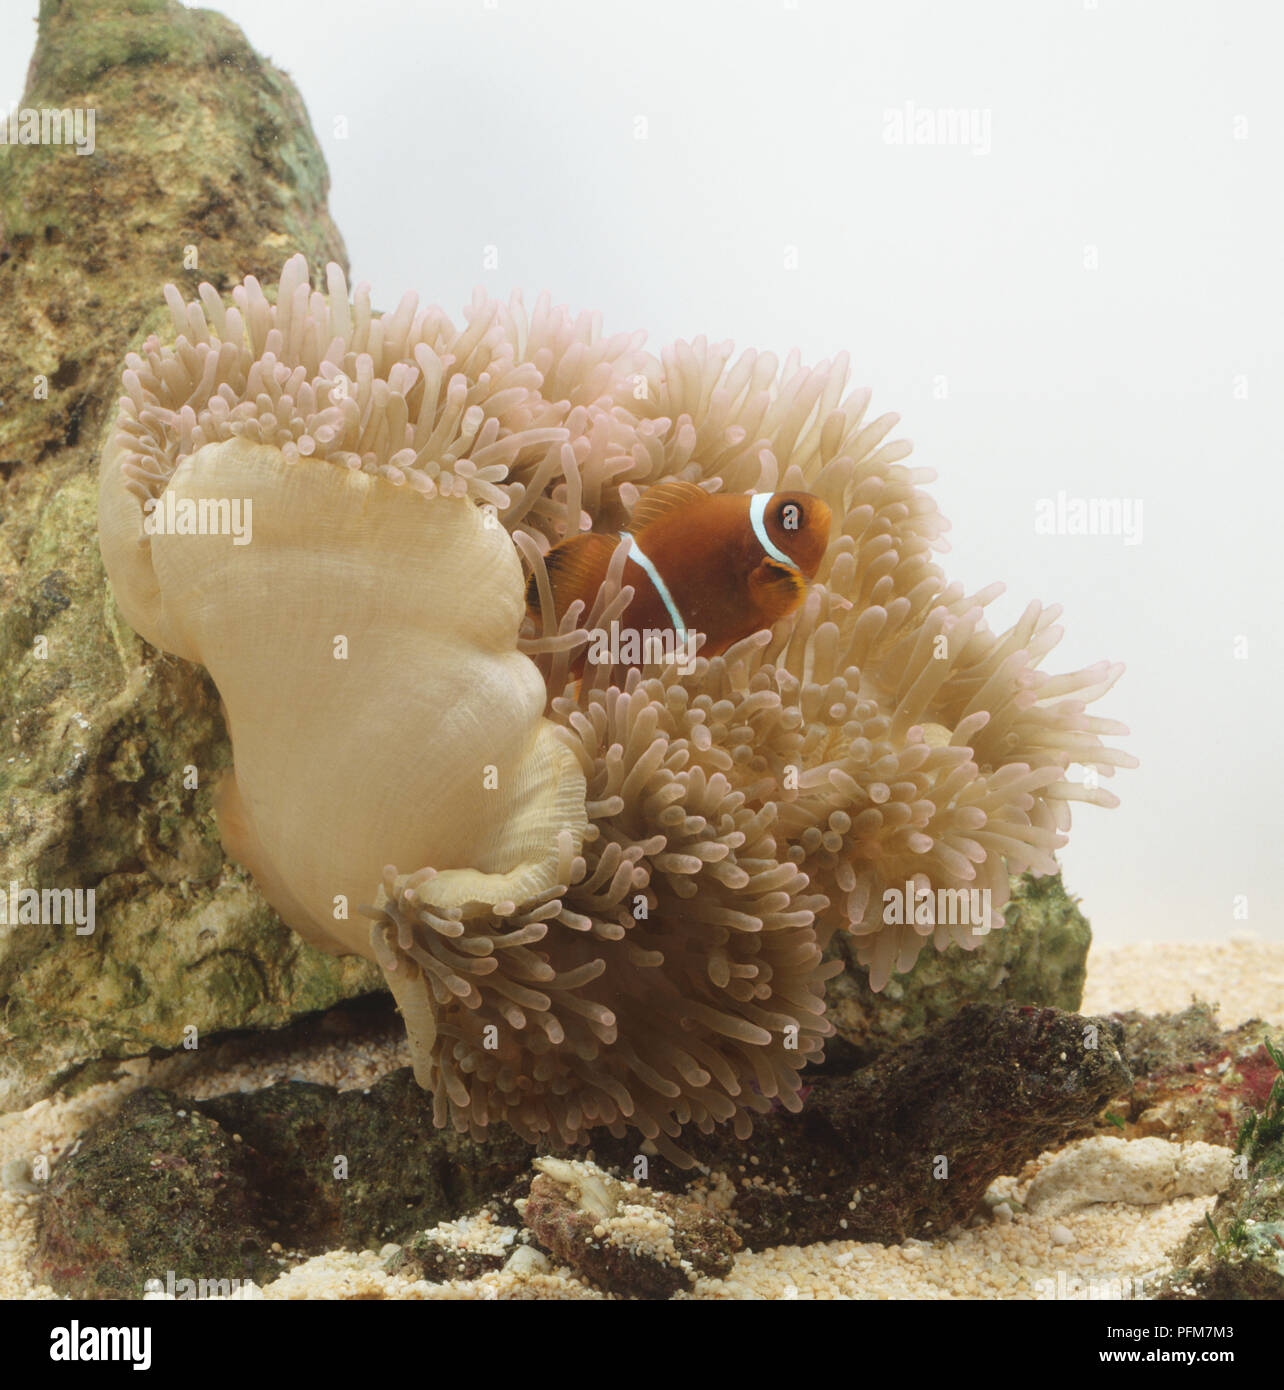 A clownfish (Amphirion sp.) in a sea anemone (Heteractis magnifica) Stock Photo